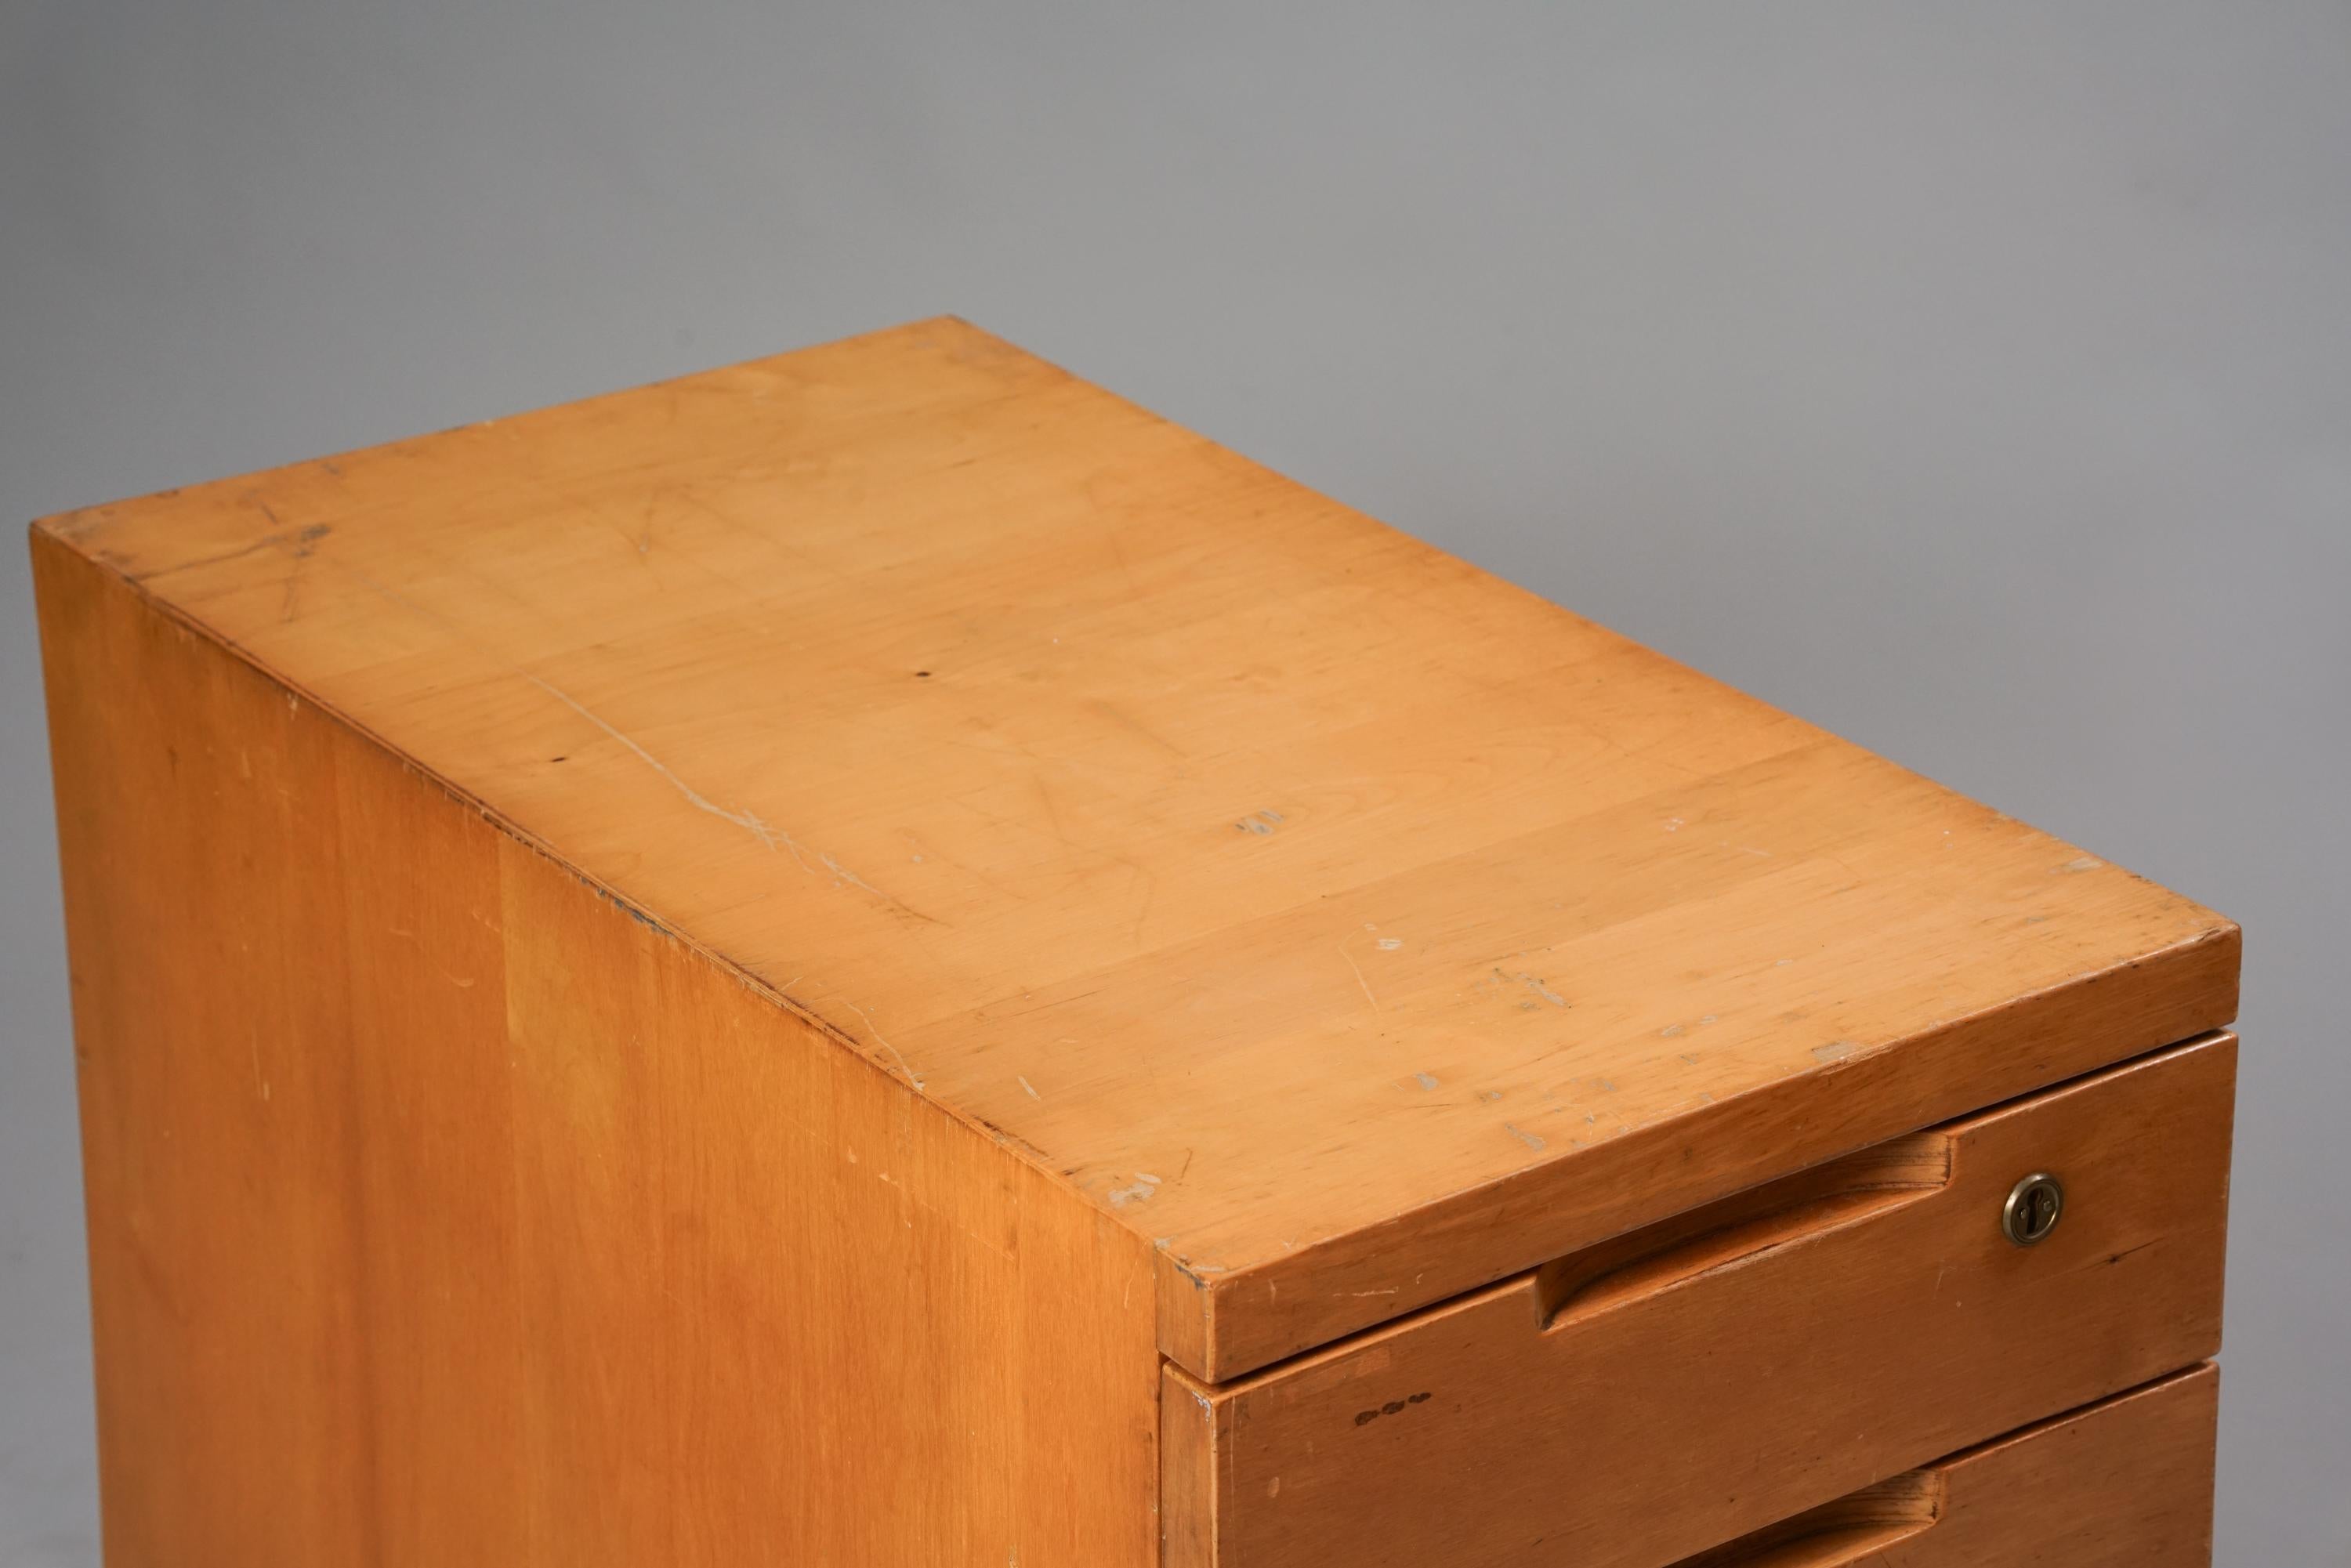 Model B96 chest of drawers, design by Aino Aalto, manufactured by Oy Huonekalu- ja Rakennustyöt AB, 1930s, birch. Marked. Good vintage condition, patina and wear consistent with age and use. 

Aino Aalto (1894-1949) was an architect, designer and